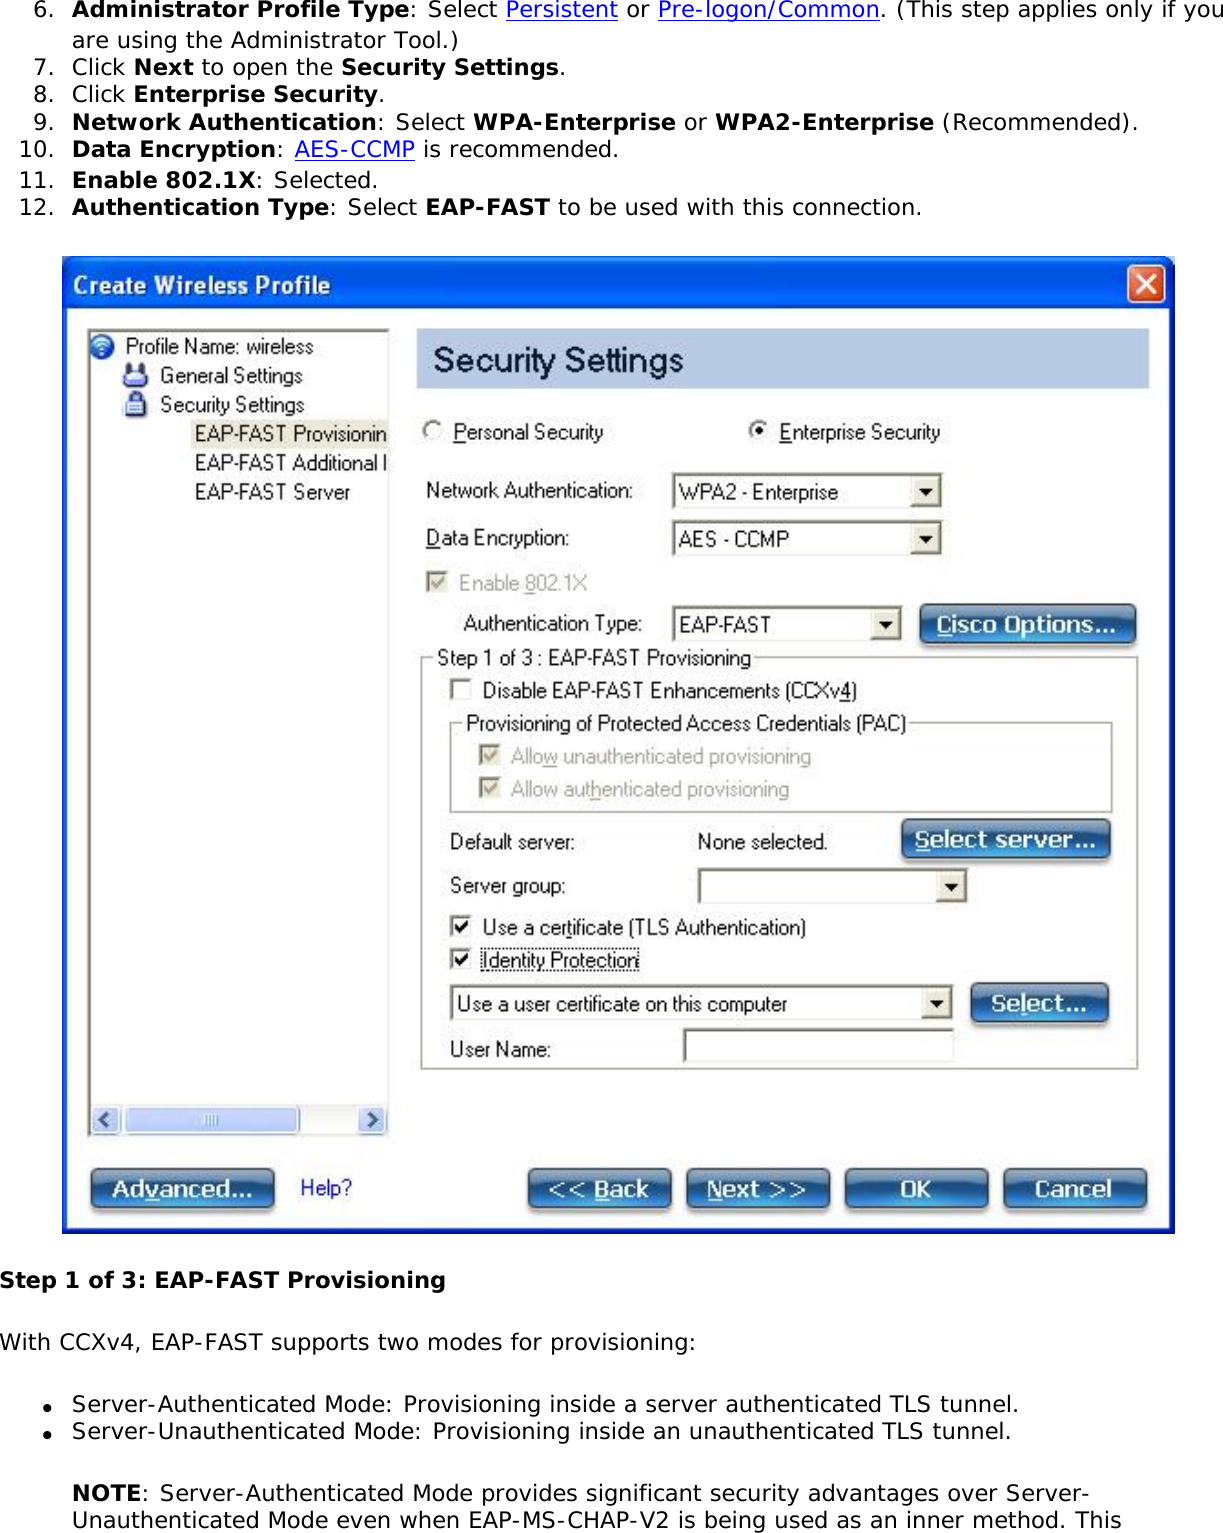 6.  Administrator Profile Type: Select Persistent or Pre-logon/Common. (This step applies only if you are using the Administrator Tool.)7.  Click Next to open the Security Settings.8.  Click Enterprise Security.9.  Network Authentication: Select WPA-Enterprise or WPA2-Enterprise (Recommended).10.  Data Encryption: AES-CCMP is recommended.11.  Enable 802.1X: Selected.12.  Authentication Type: Select EAP-FAST to be used with this connection.Step 1 of 3: EAP-FAST Provisioning With CCXv4, EAP-FAST supports two modes for provisioning:●     Server-Authenticated Mode: Provisioning inside a server authenticated TLS tunnel.●     Server-Unauthenticated Mode: Provisioning inside an unauthenticated TLS tunnel.NOTE: Server-Authenticated Mode provides significant security advantages over Server-Unauthenticated Mode even when EAP-MS-CHAP-V2 is being used as an inner method. This 